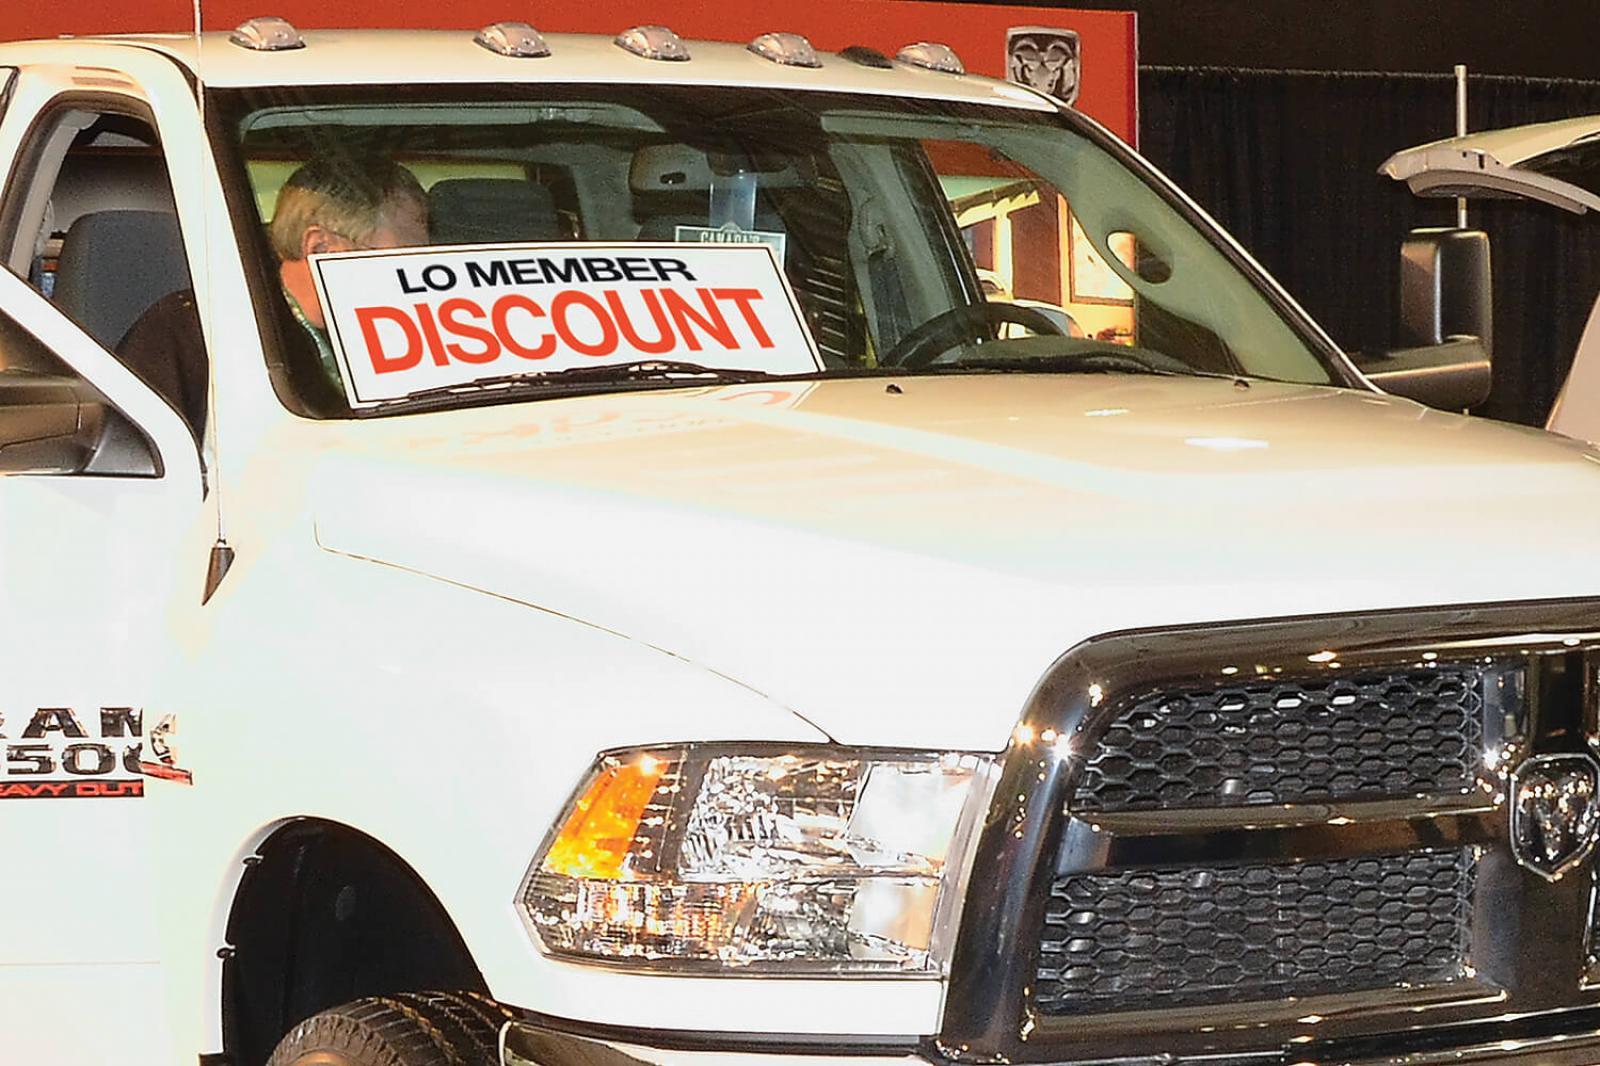 Vehicle discounts continue to be a great savings benefit for CNLA members.